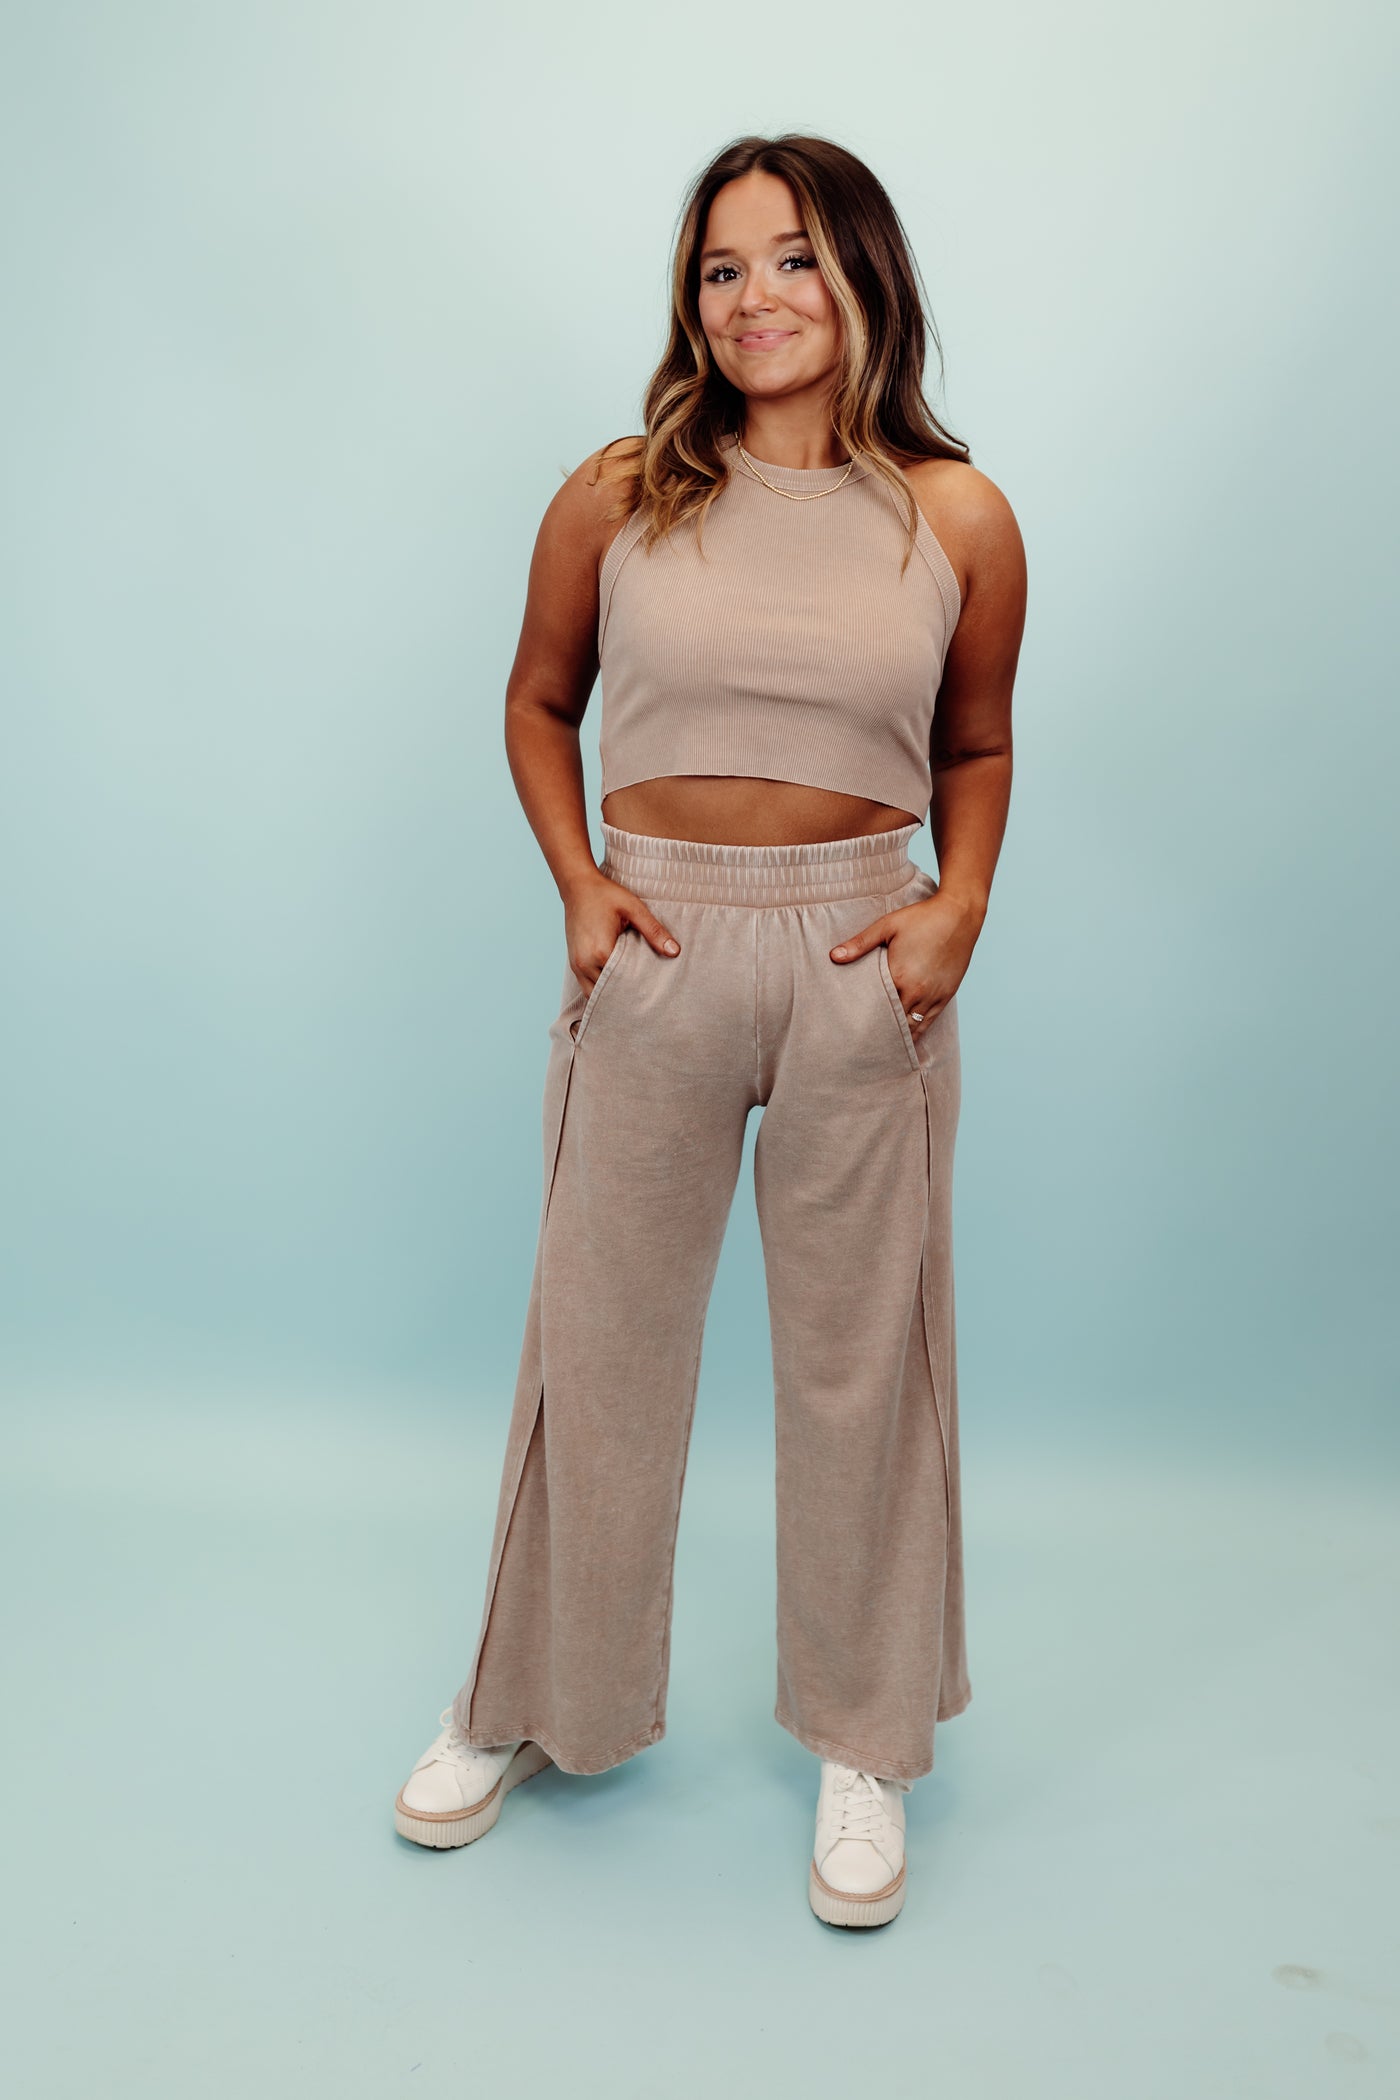 Taupe Halter Neck Crop Top and Wide Leg Pant Set